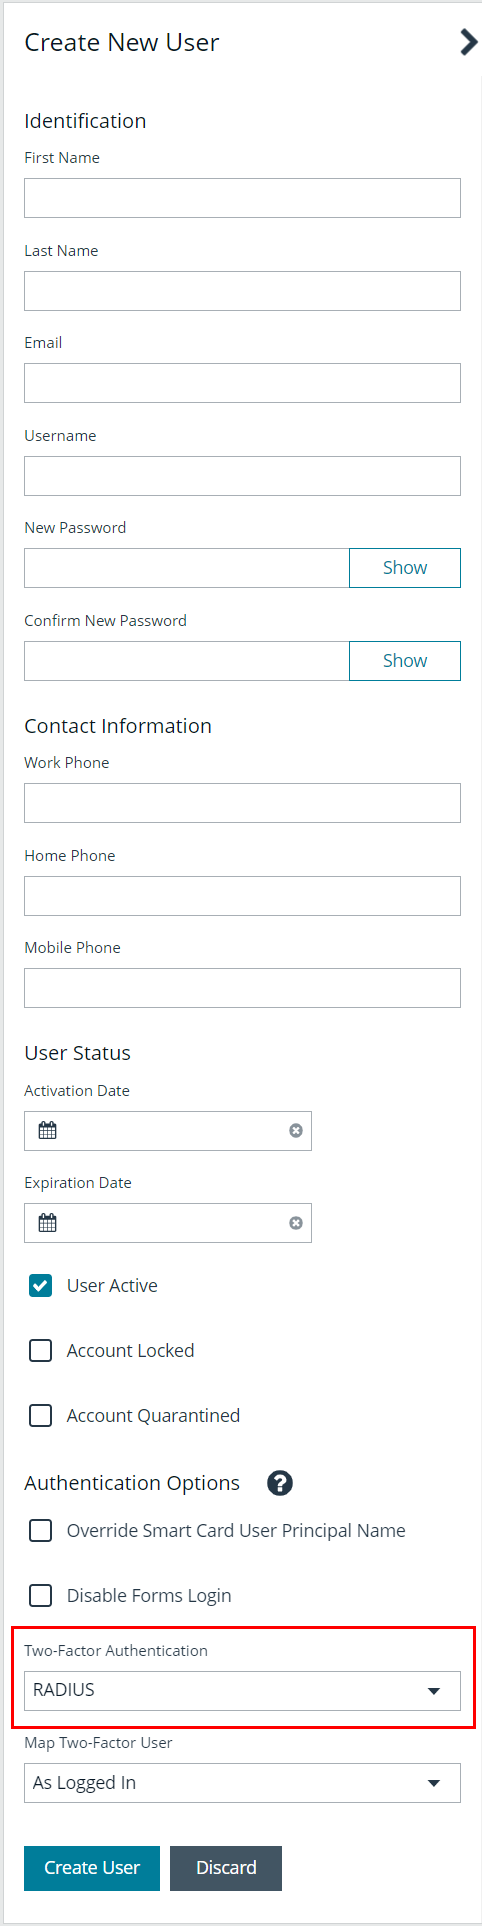 RADIUS Two-Factor Authentication Option on a User Account